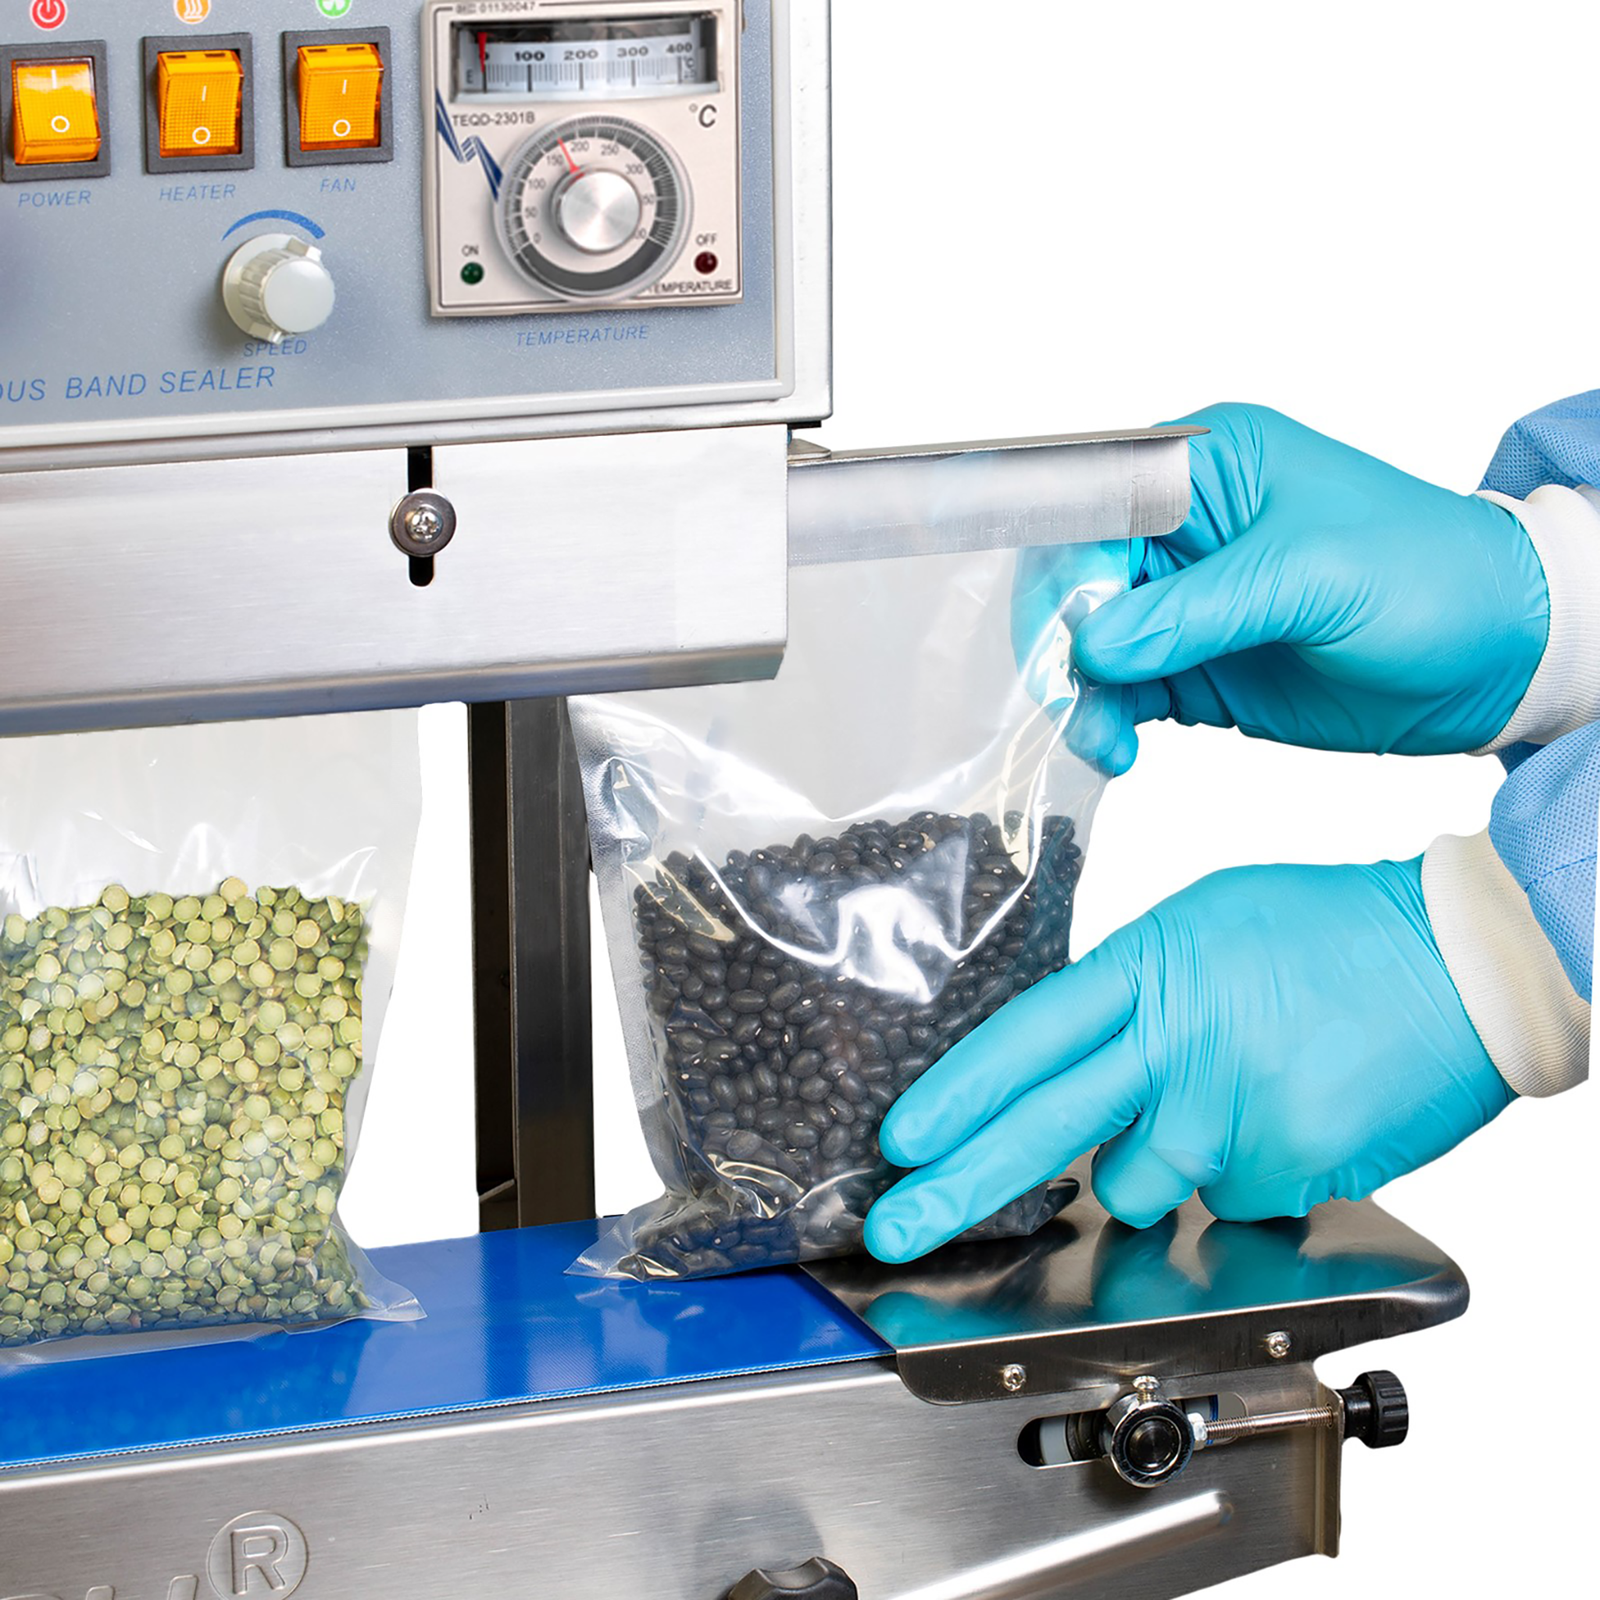 operator wearing blue gloves inserting sealable clear bags into a JORESTECH vertical band sealer filled with black beans and green lentils